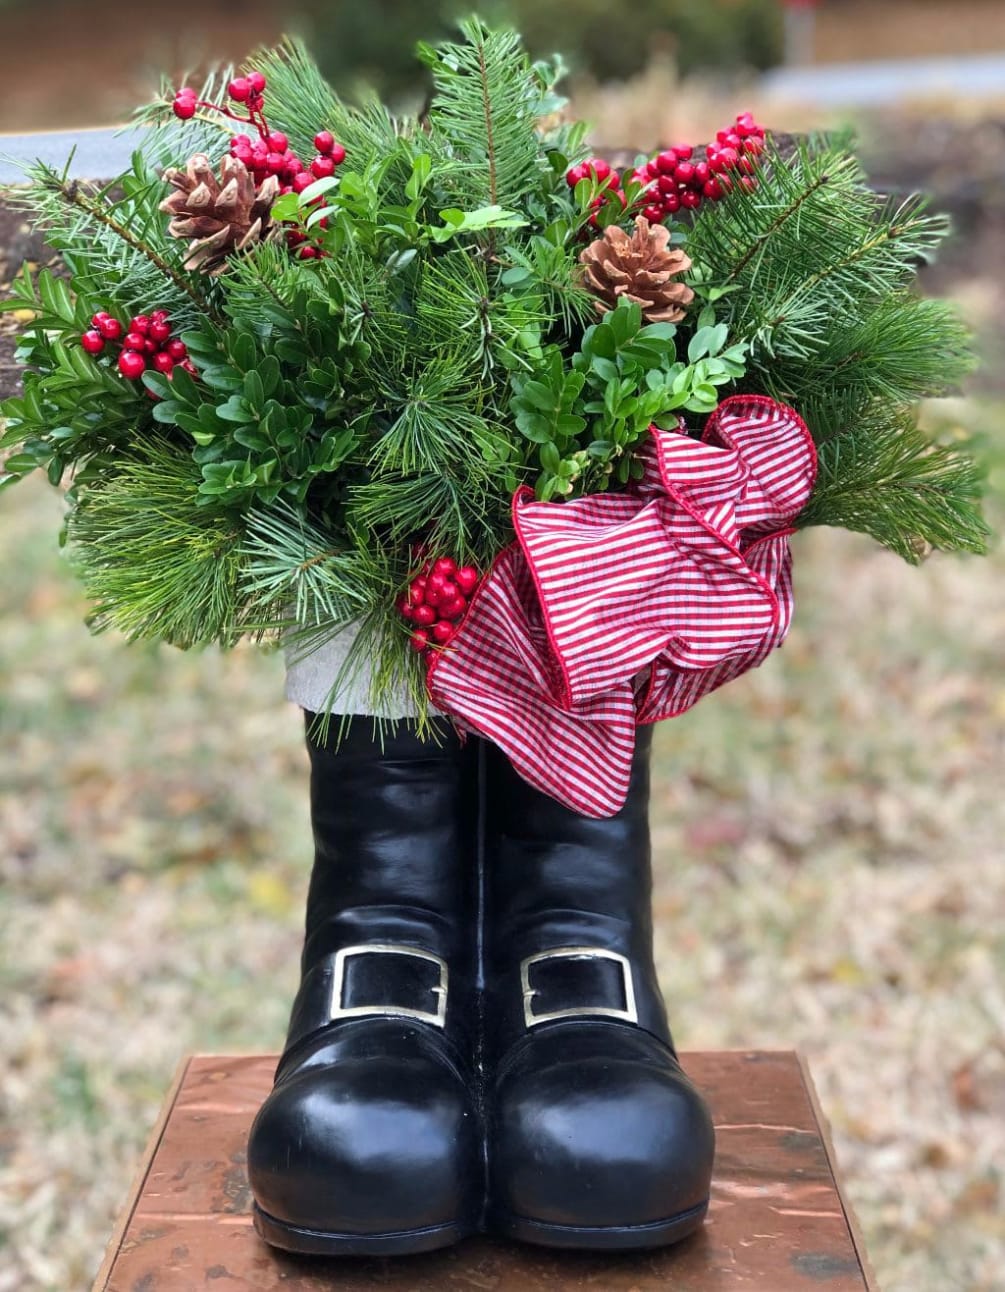 Santa Boots by Petals Flowers and Fine Gifts